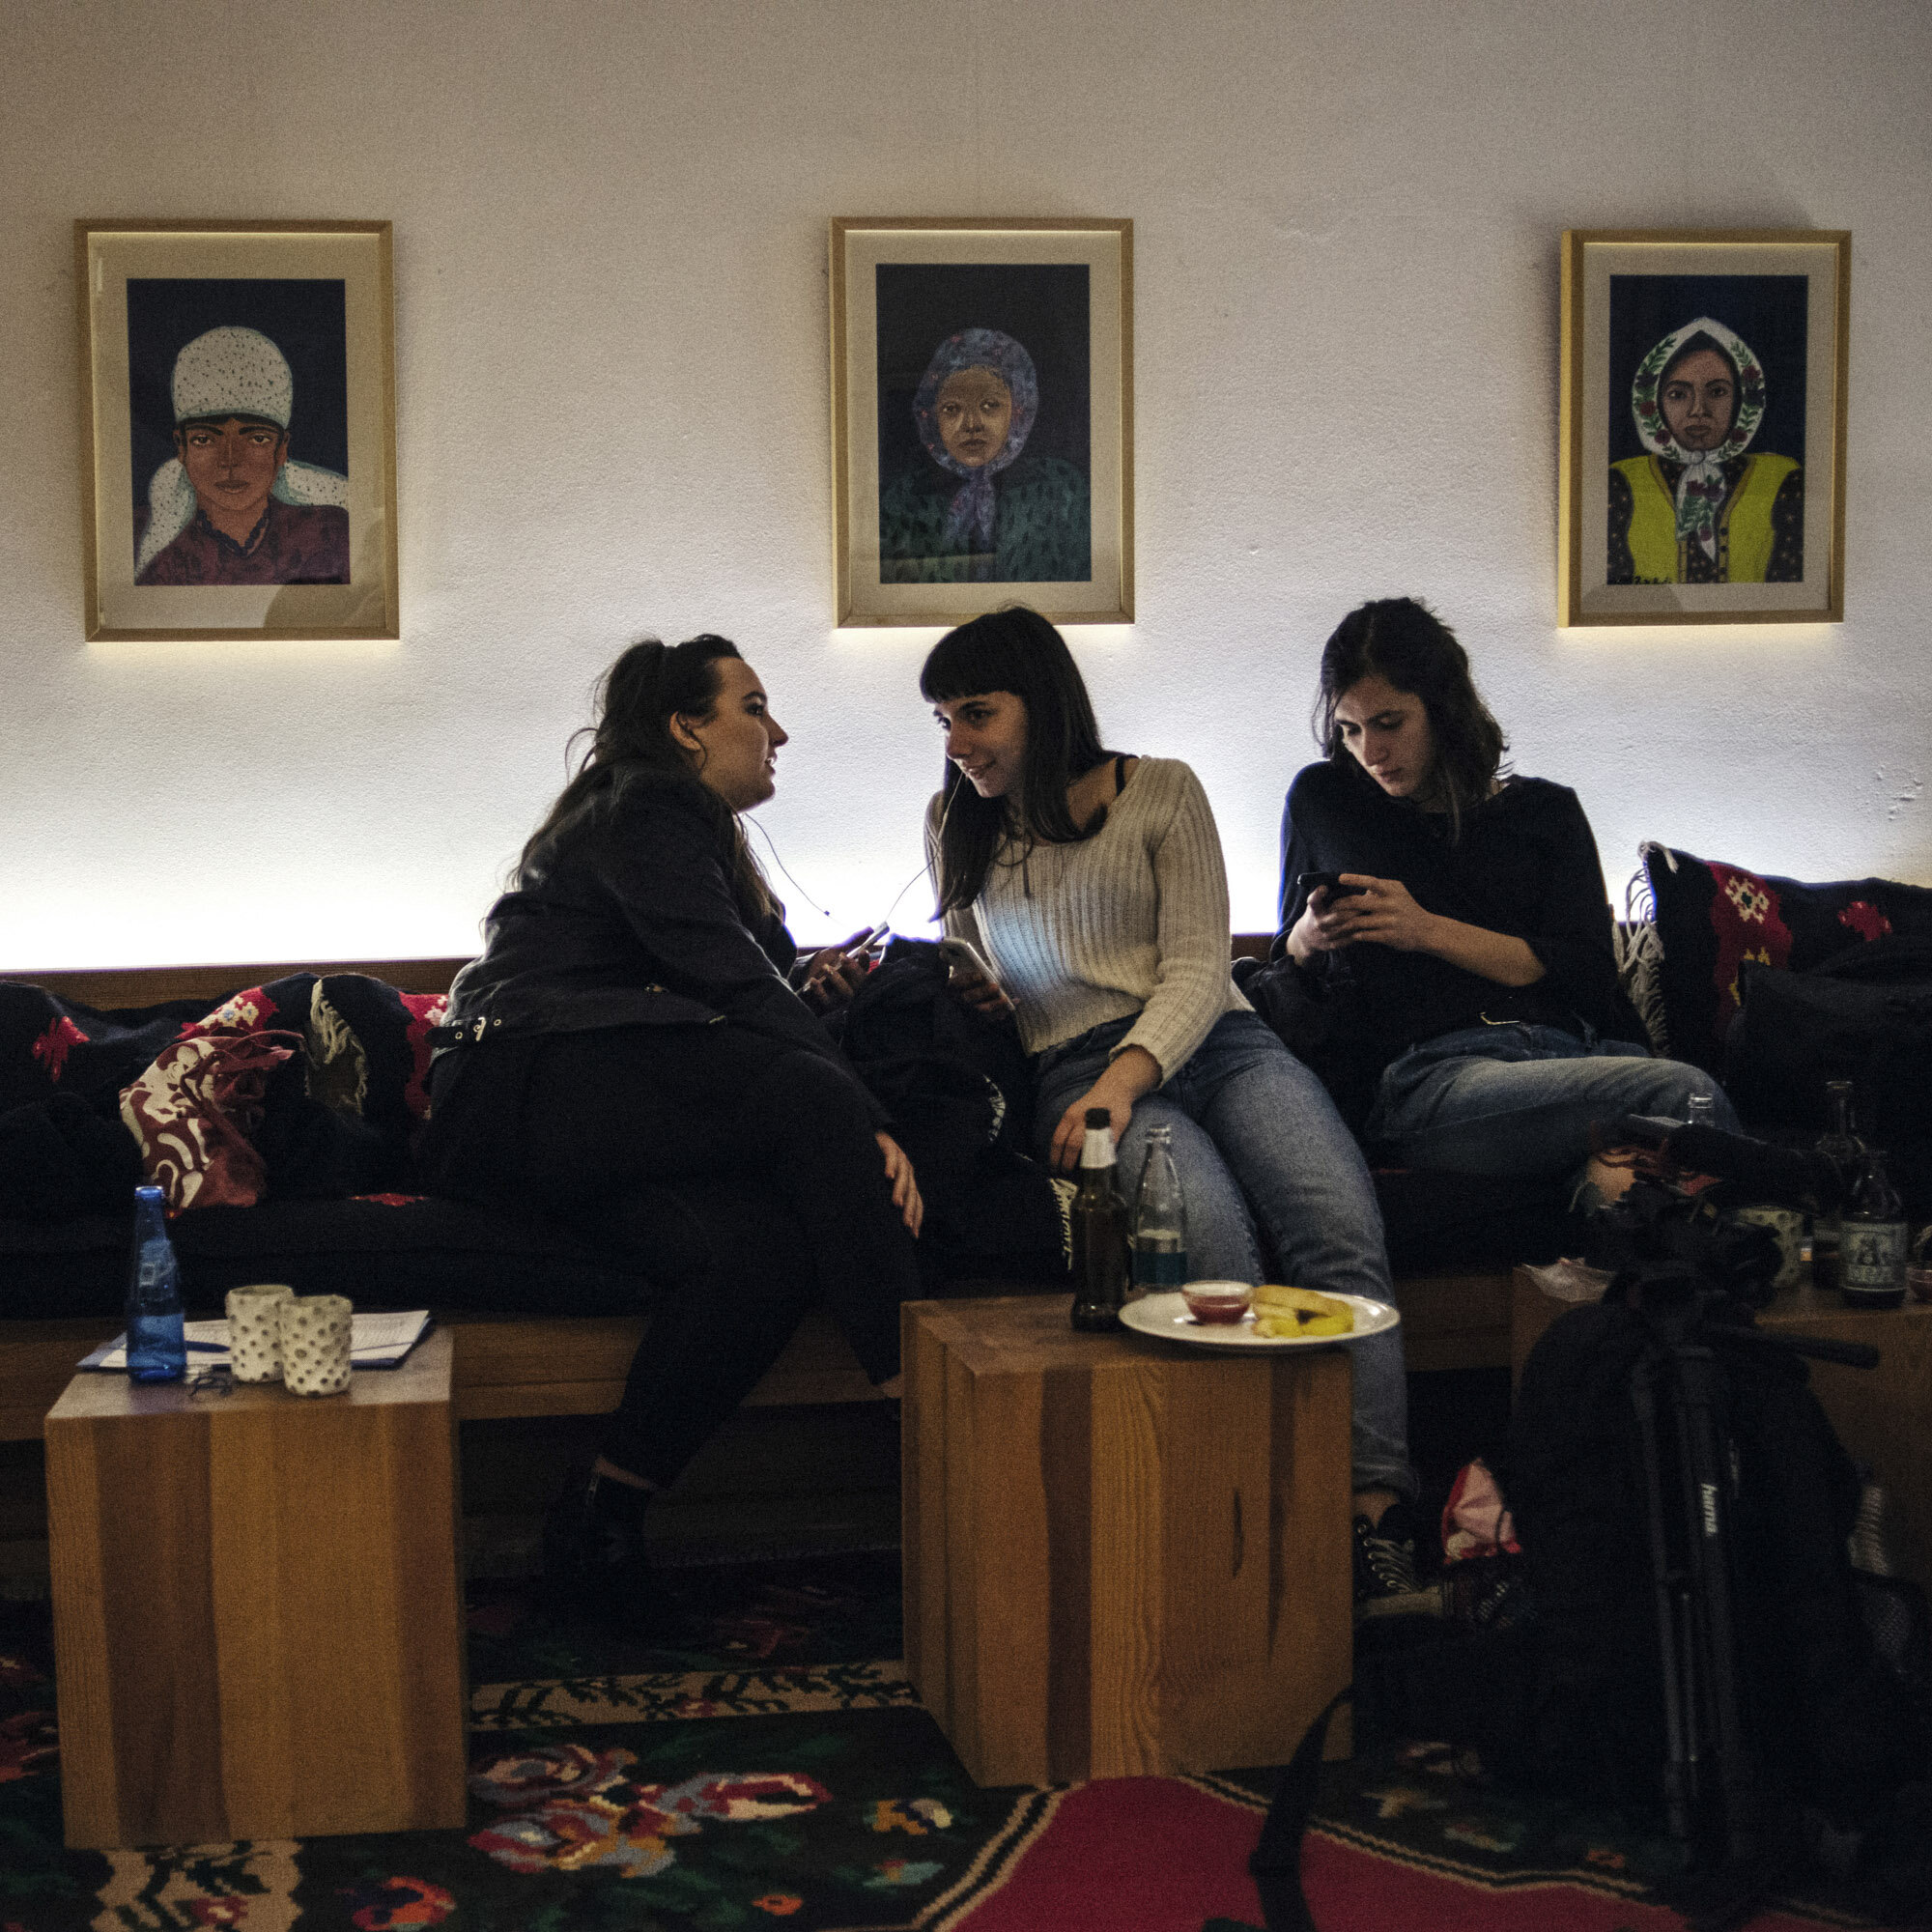  Dua and Ilda listen to music and sing as Tringa writes messages on her phone. Before their concert at the Genchis Pub in Gracanica, the students from the rock school went to dinner and drink some beers at the Hotel Gracanica. Gracanica, Kosovo, Marc